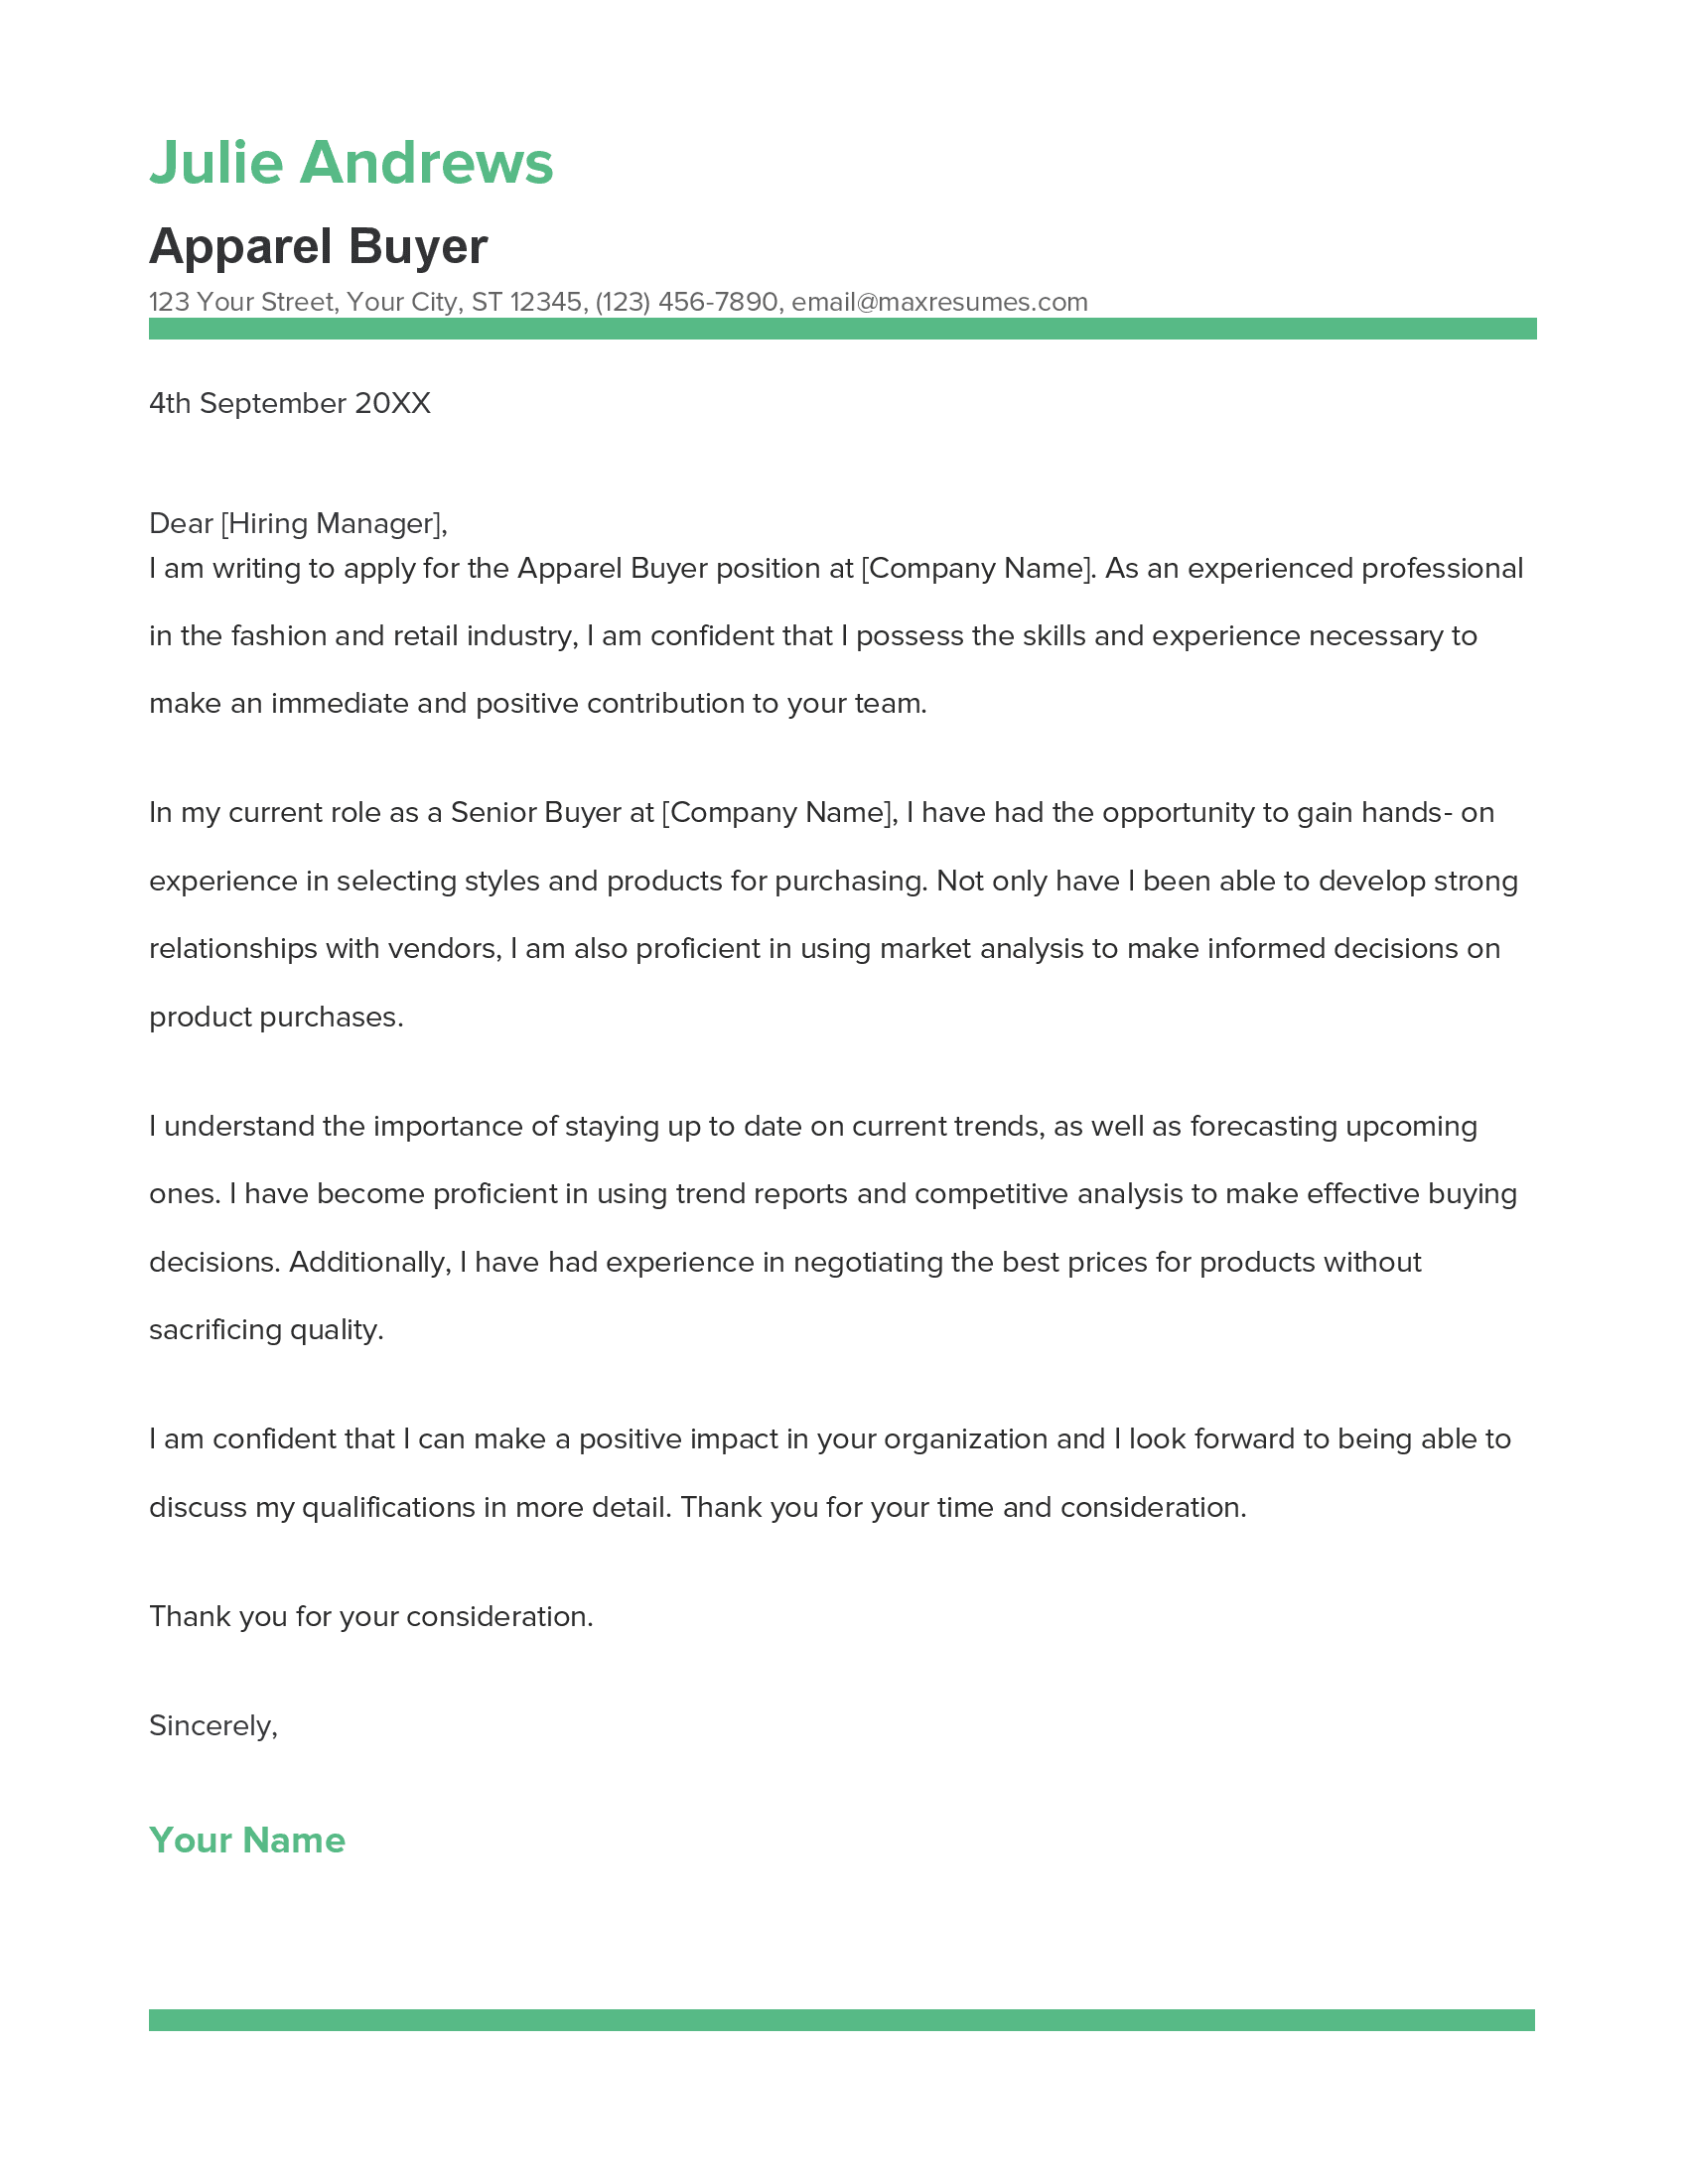 Apparel Buyer Cover Letter Example